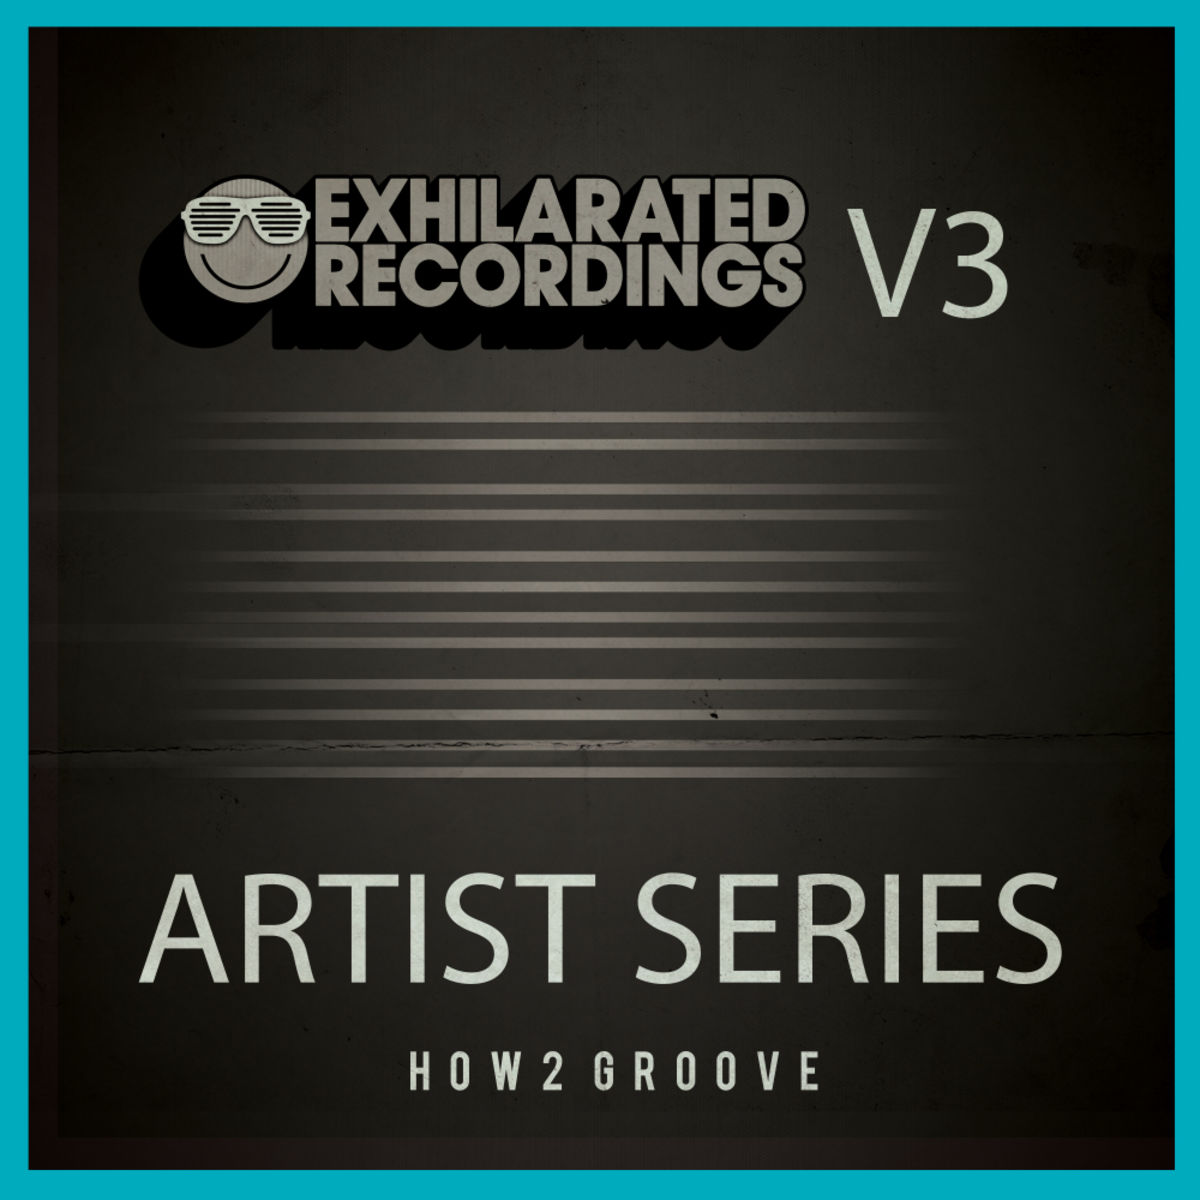 How2 Groove - Exhilarated Recordings Artist Series, Vol. 3 / Exhilarated Recordings